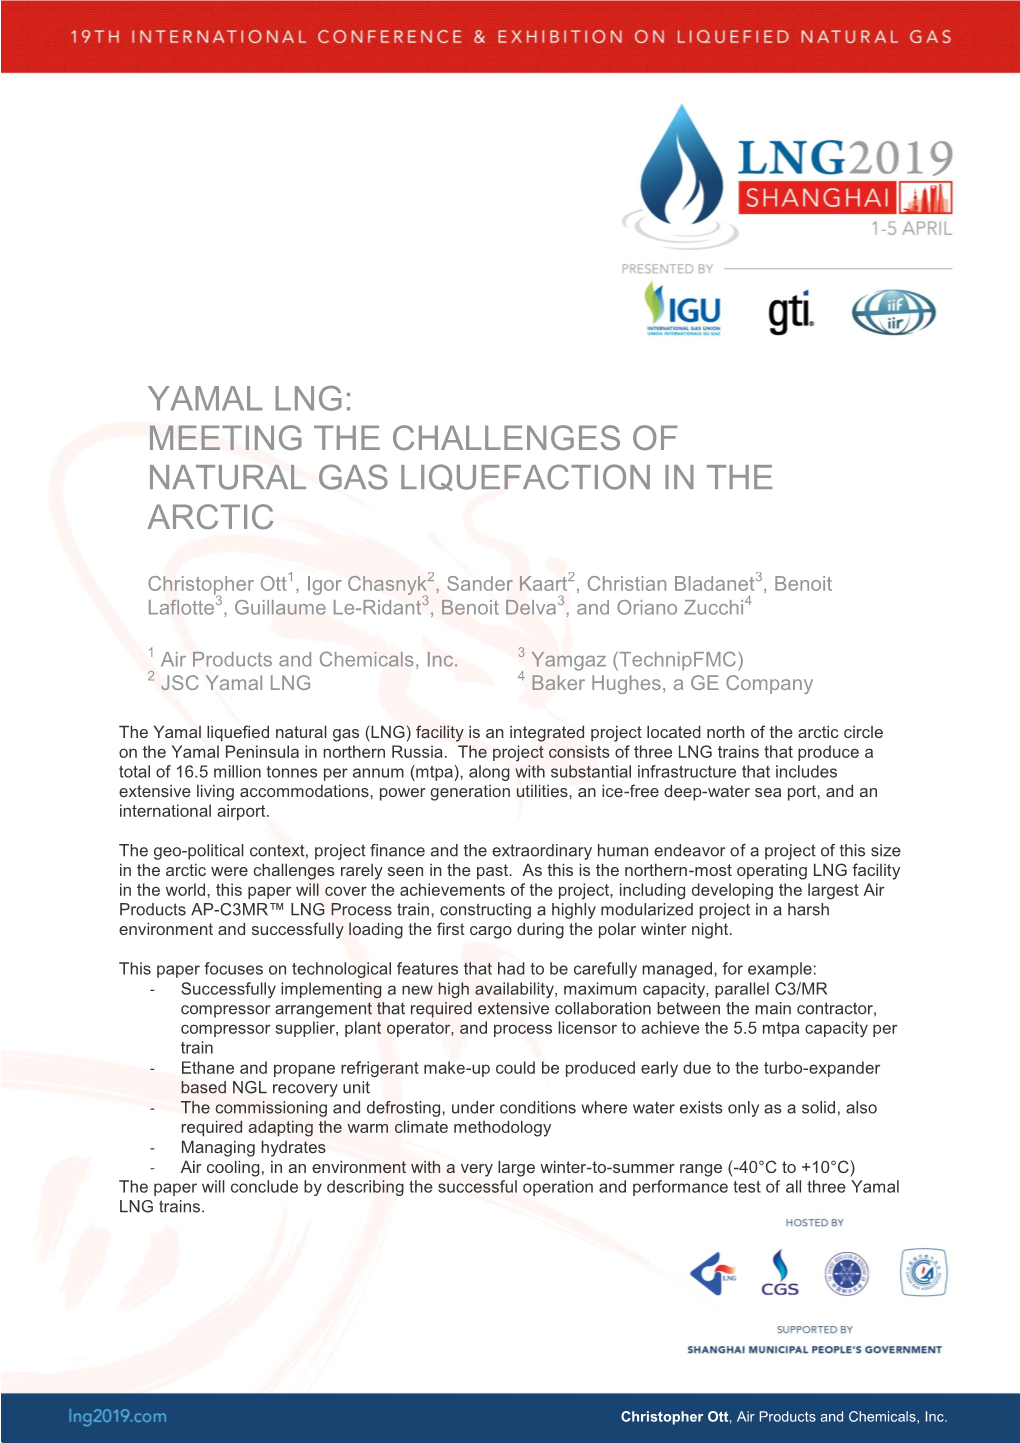 Yamal Lng: Meeting the Challenges of Natural Gas Liquefaction in the Arctic